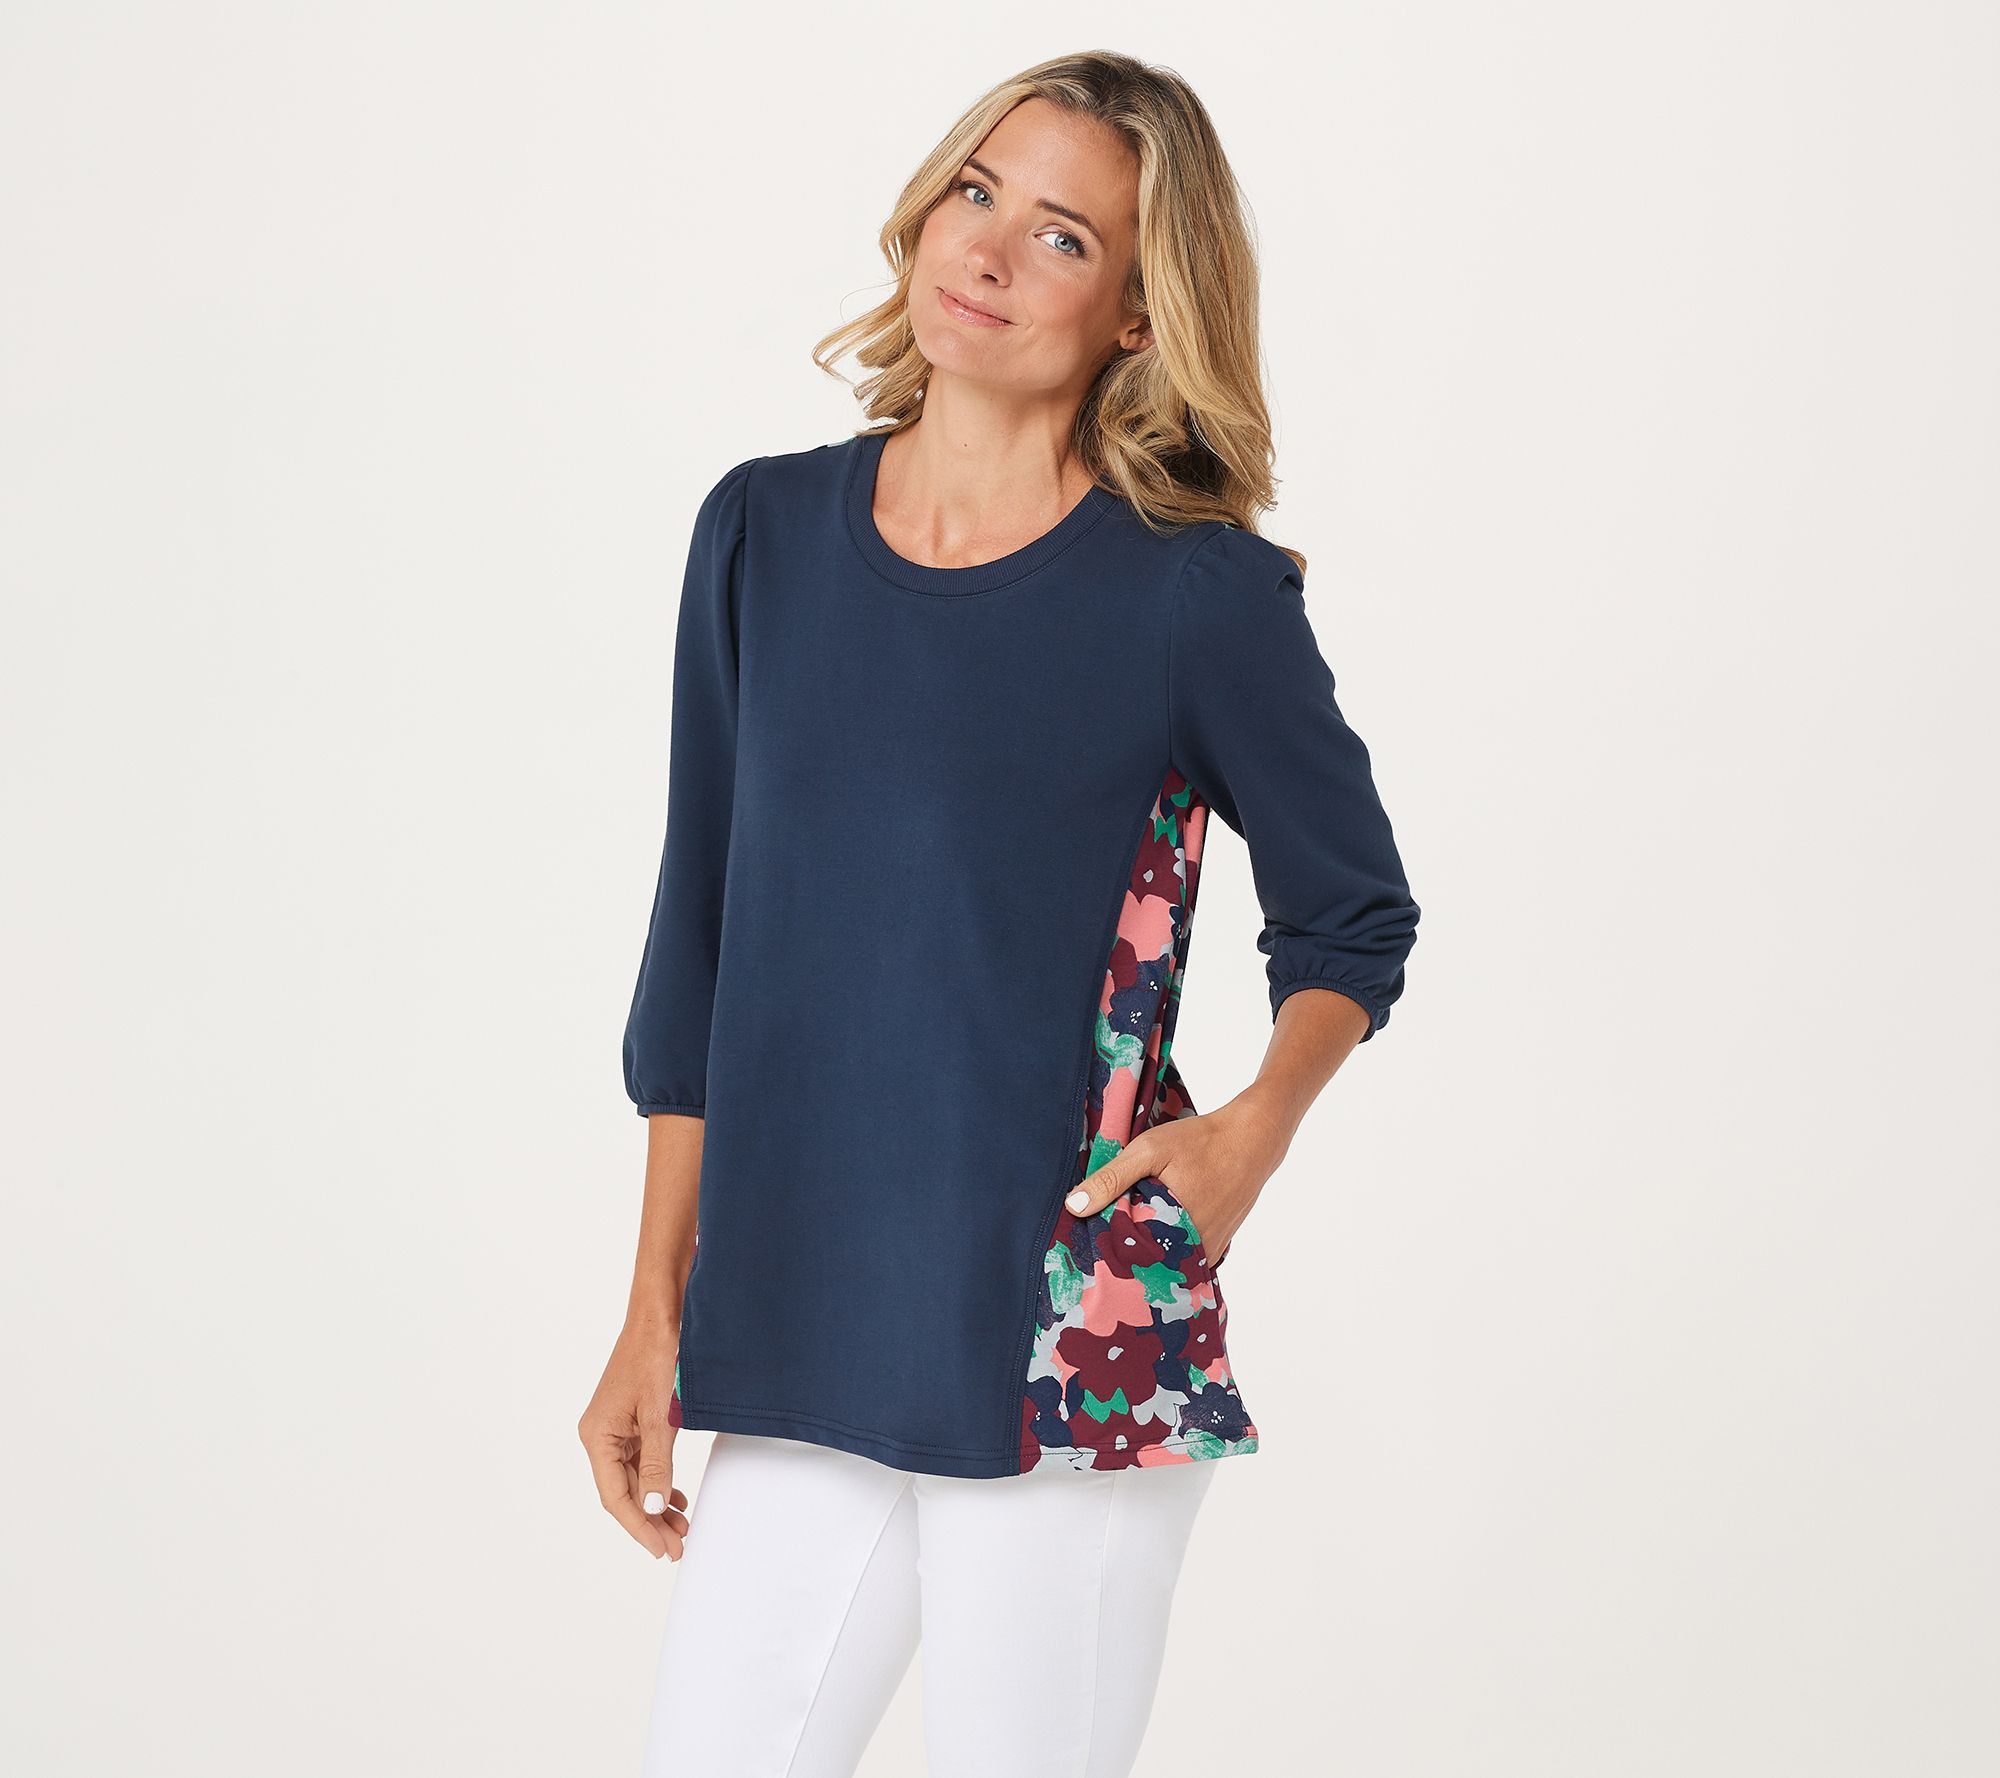 LOGO Lounge by Lori Goldstein Cotton French Terry Top with Printed Back ...